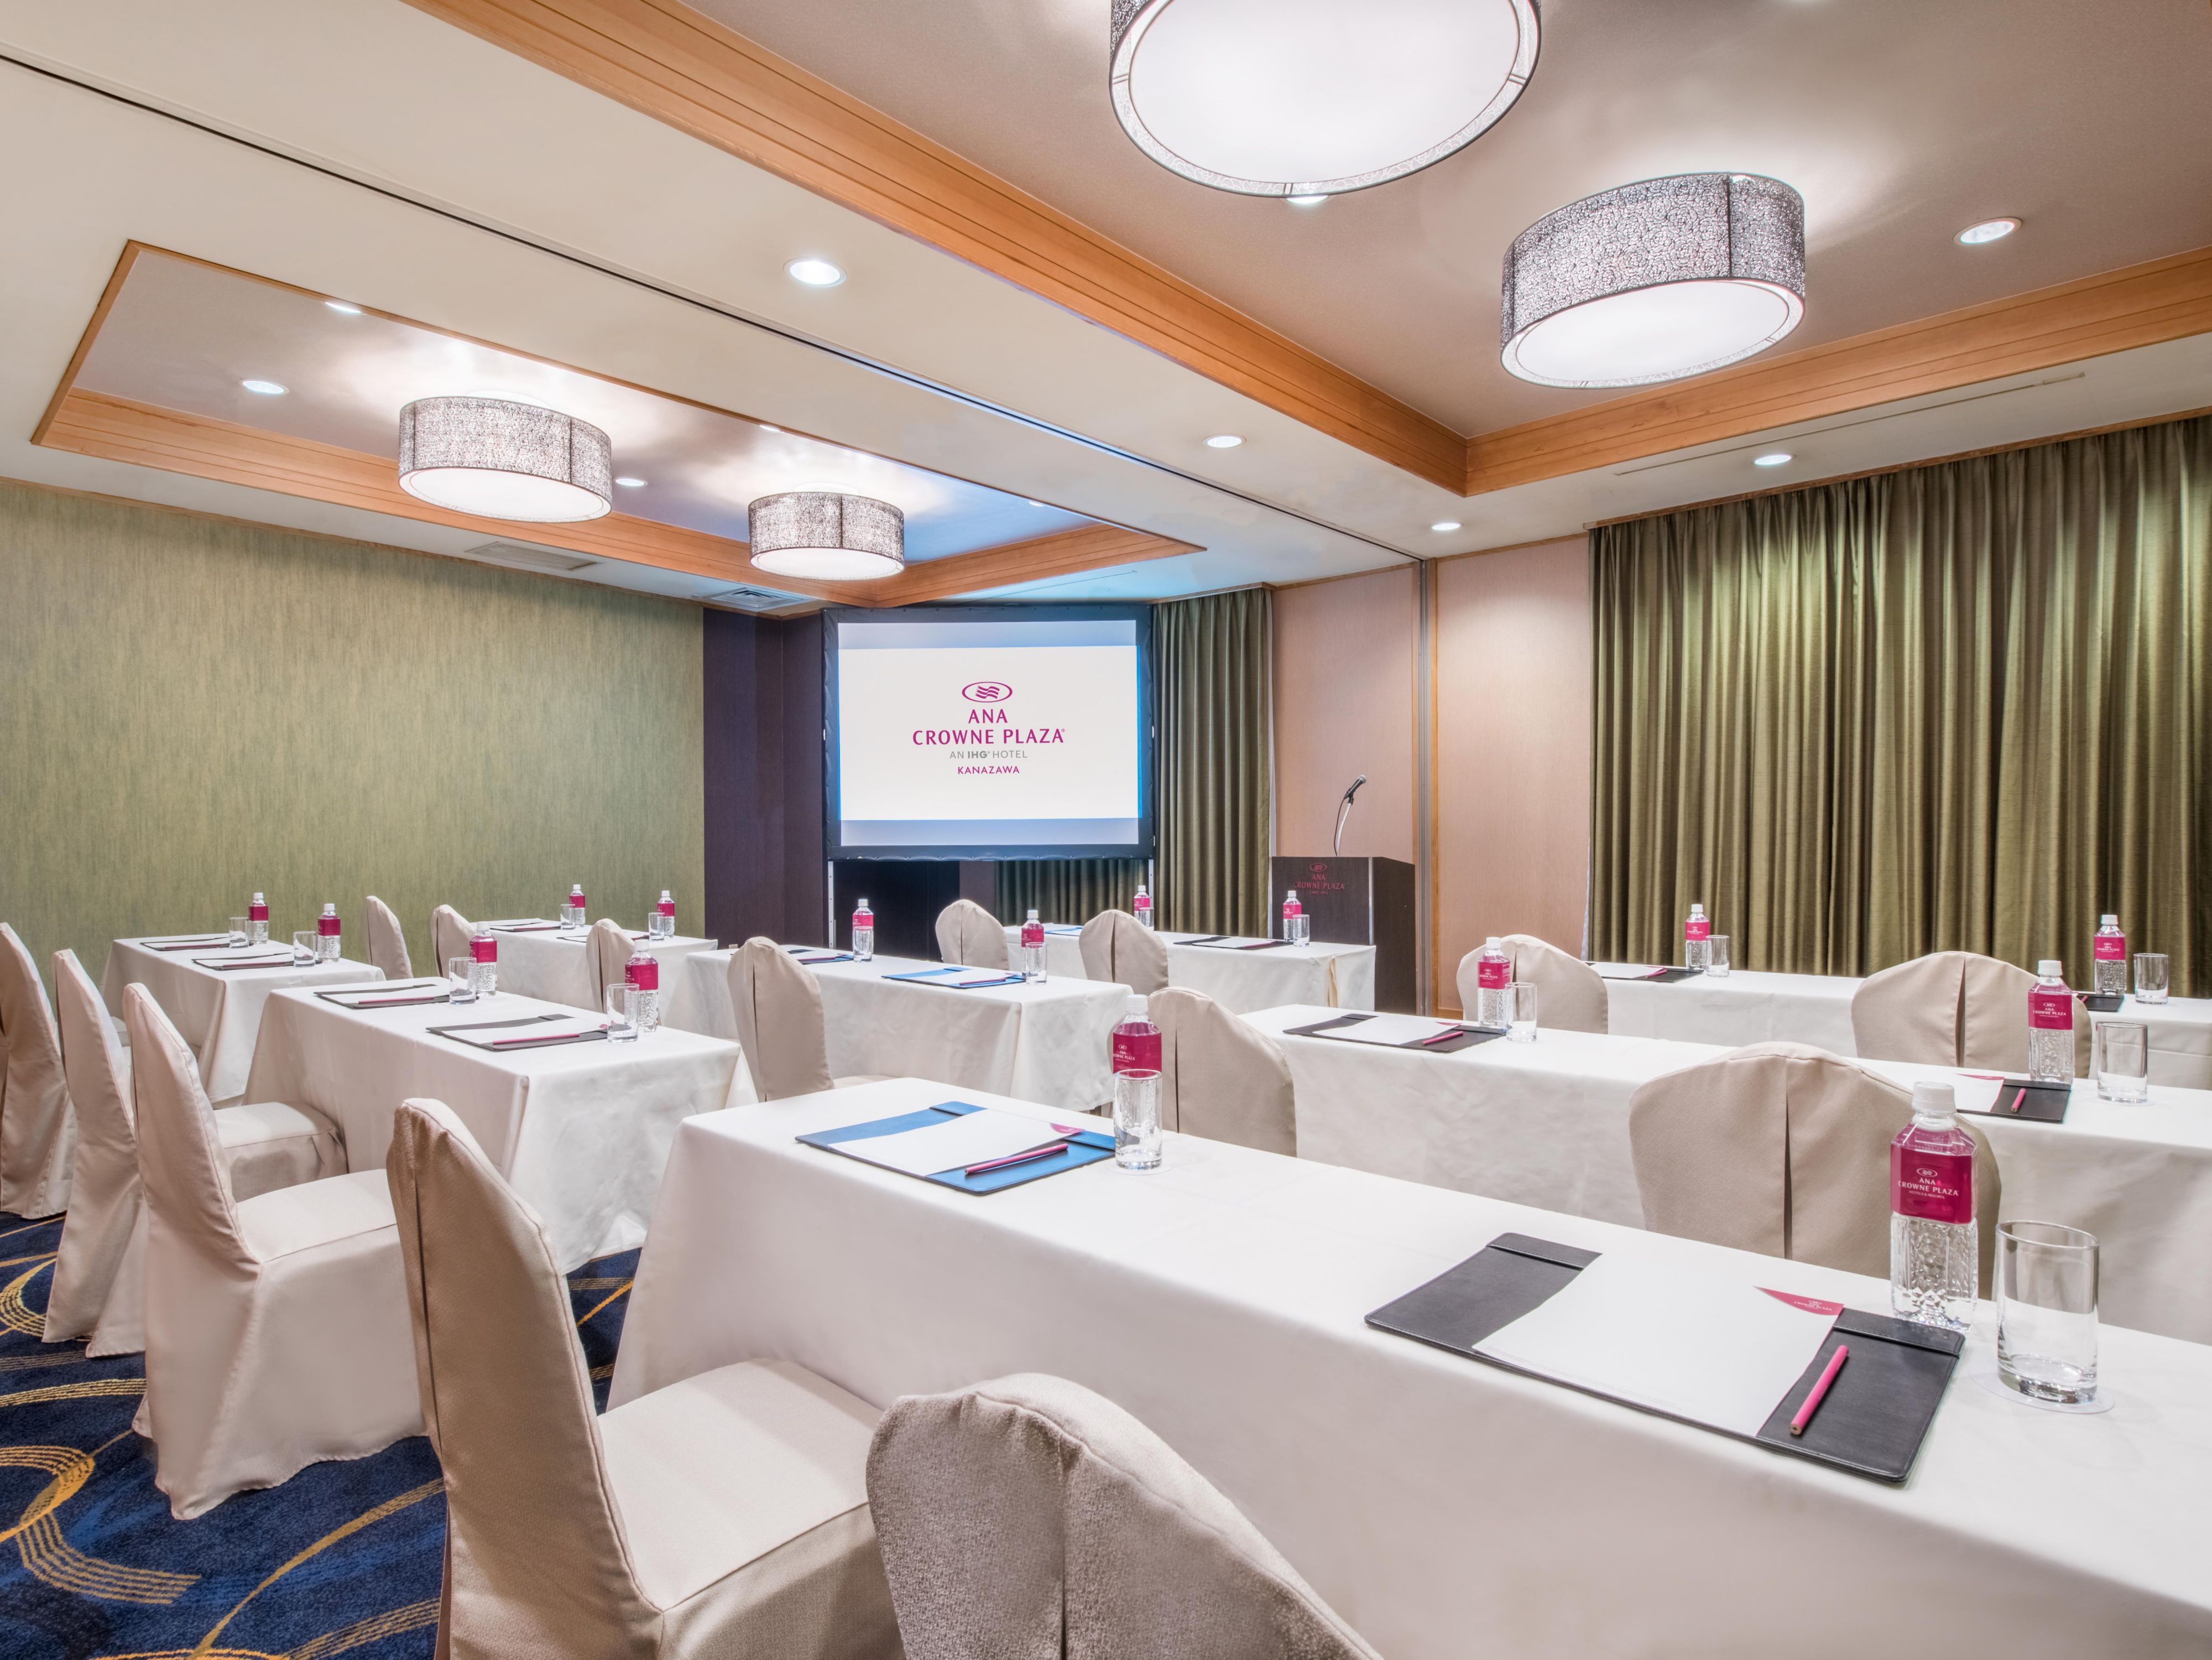 For your successful event, your personal events director will support you all the way.
We have various banquet and meeting rooms to suit your events. And also, Ishikawa Prefectural Music Hall, which has a capacity of 1,560 people, is next to our hotel. It’s best for international conferences.